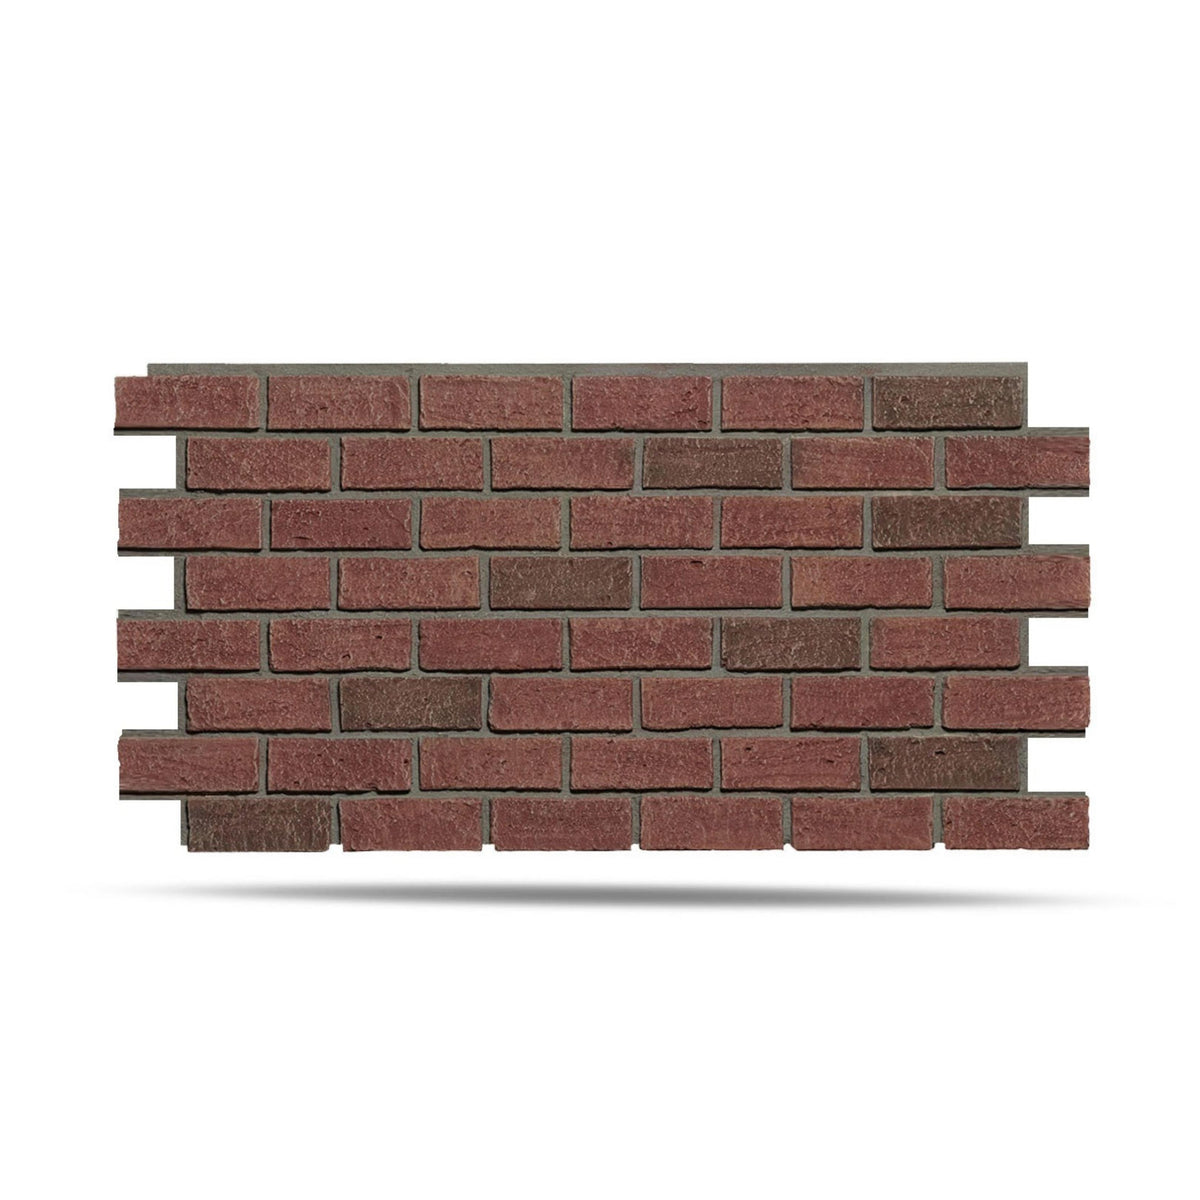 ClassicBrick 1/2" Faux Brick Panels - Old Italy